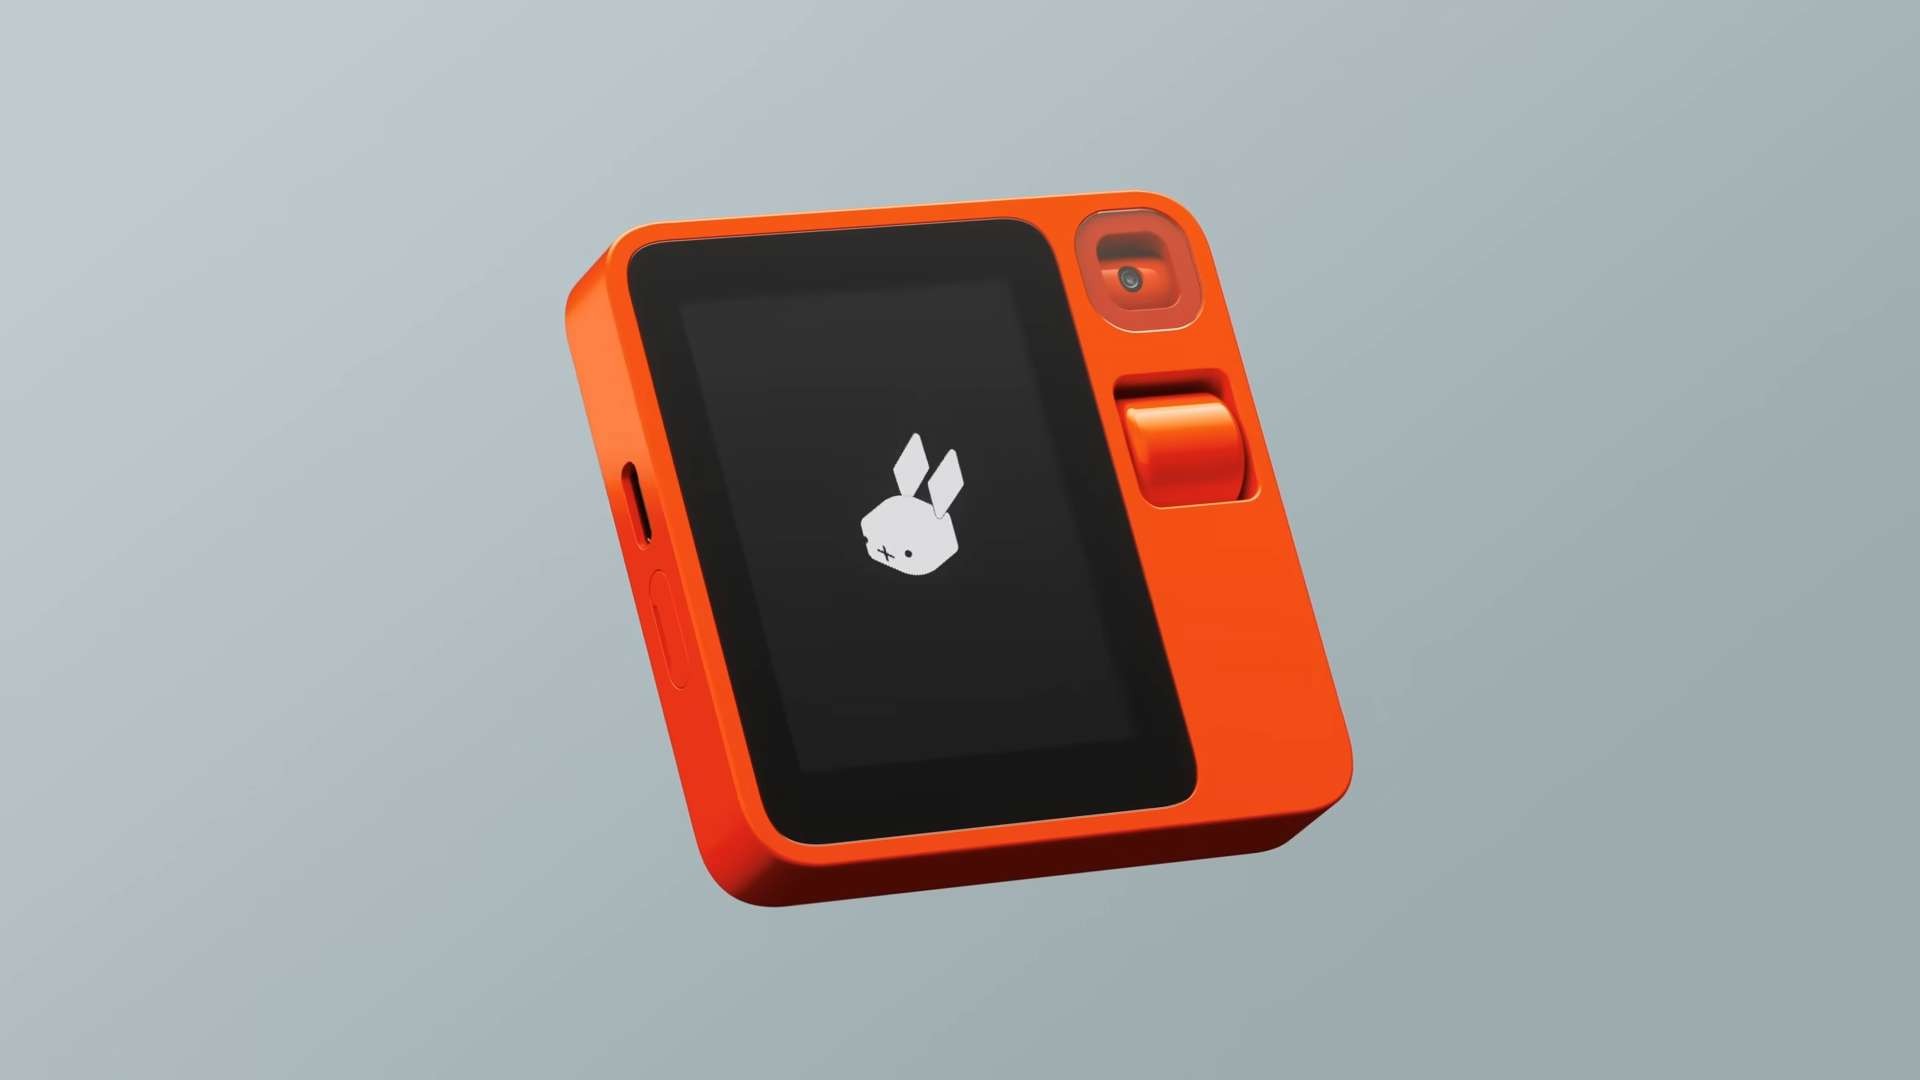 Rabbit r1 is a revolutionary AI device that interacts with the smartphone -  GizChina.it